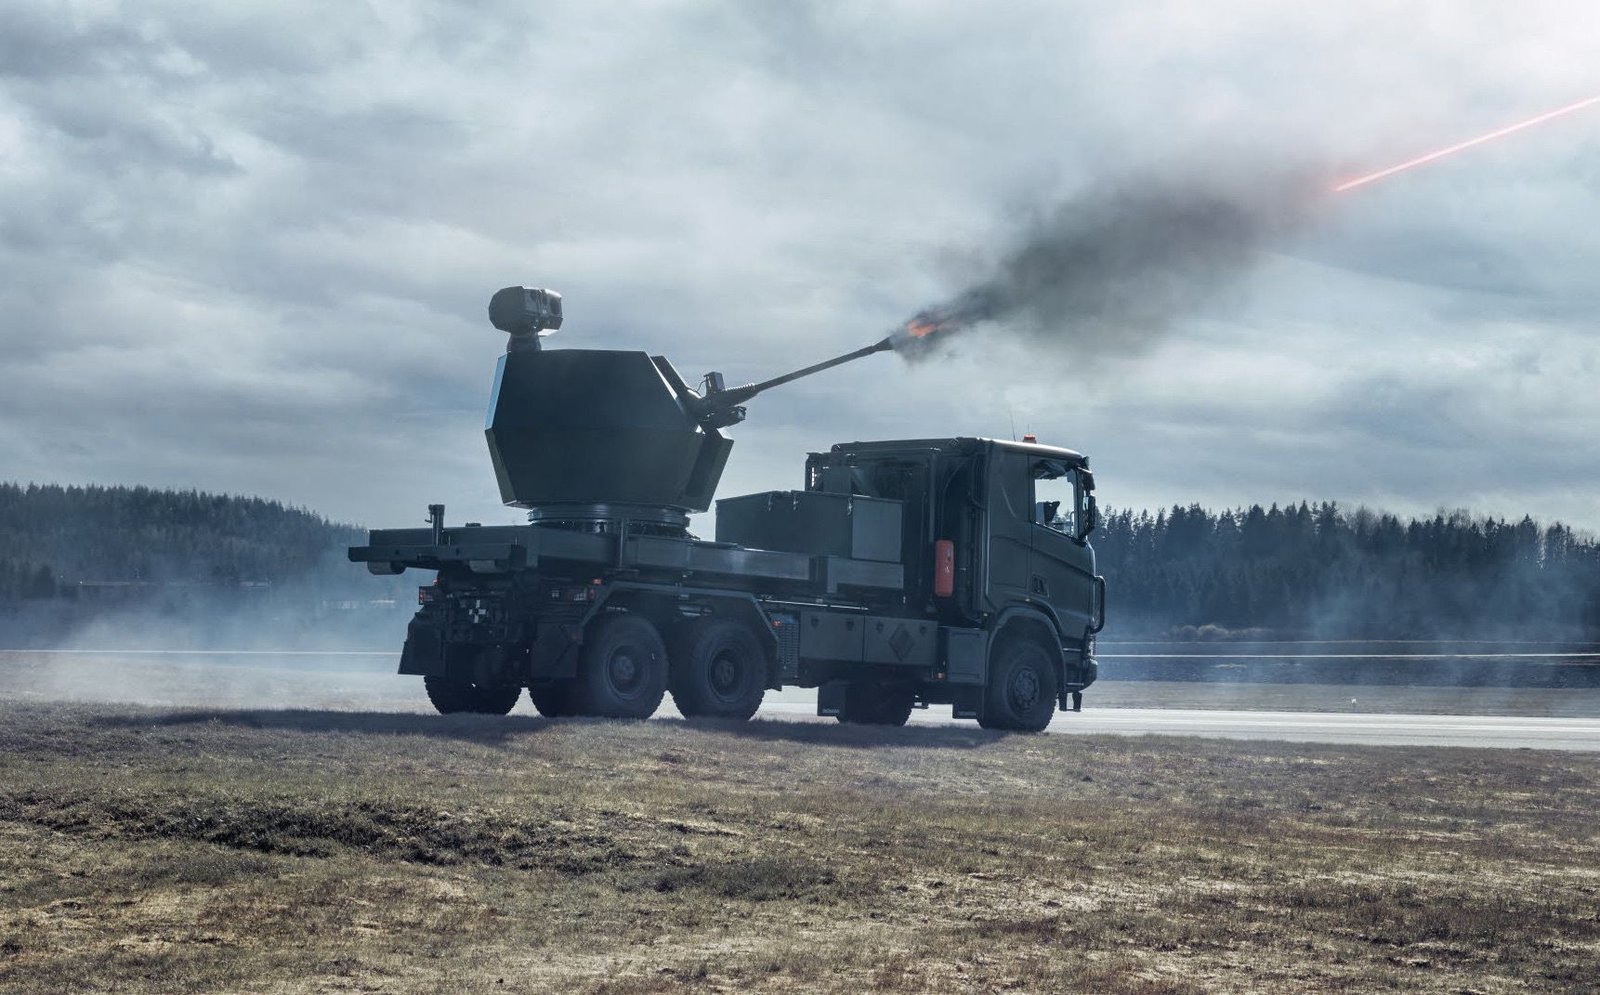 BAE Systems to unveil new air defense system at Eurosatory